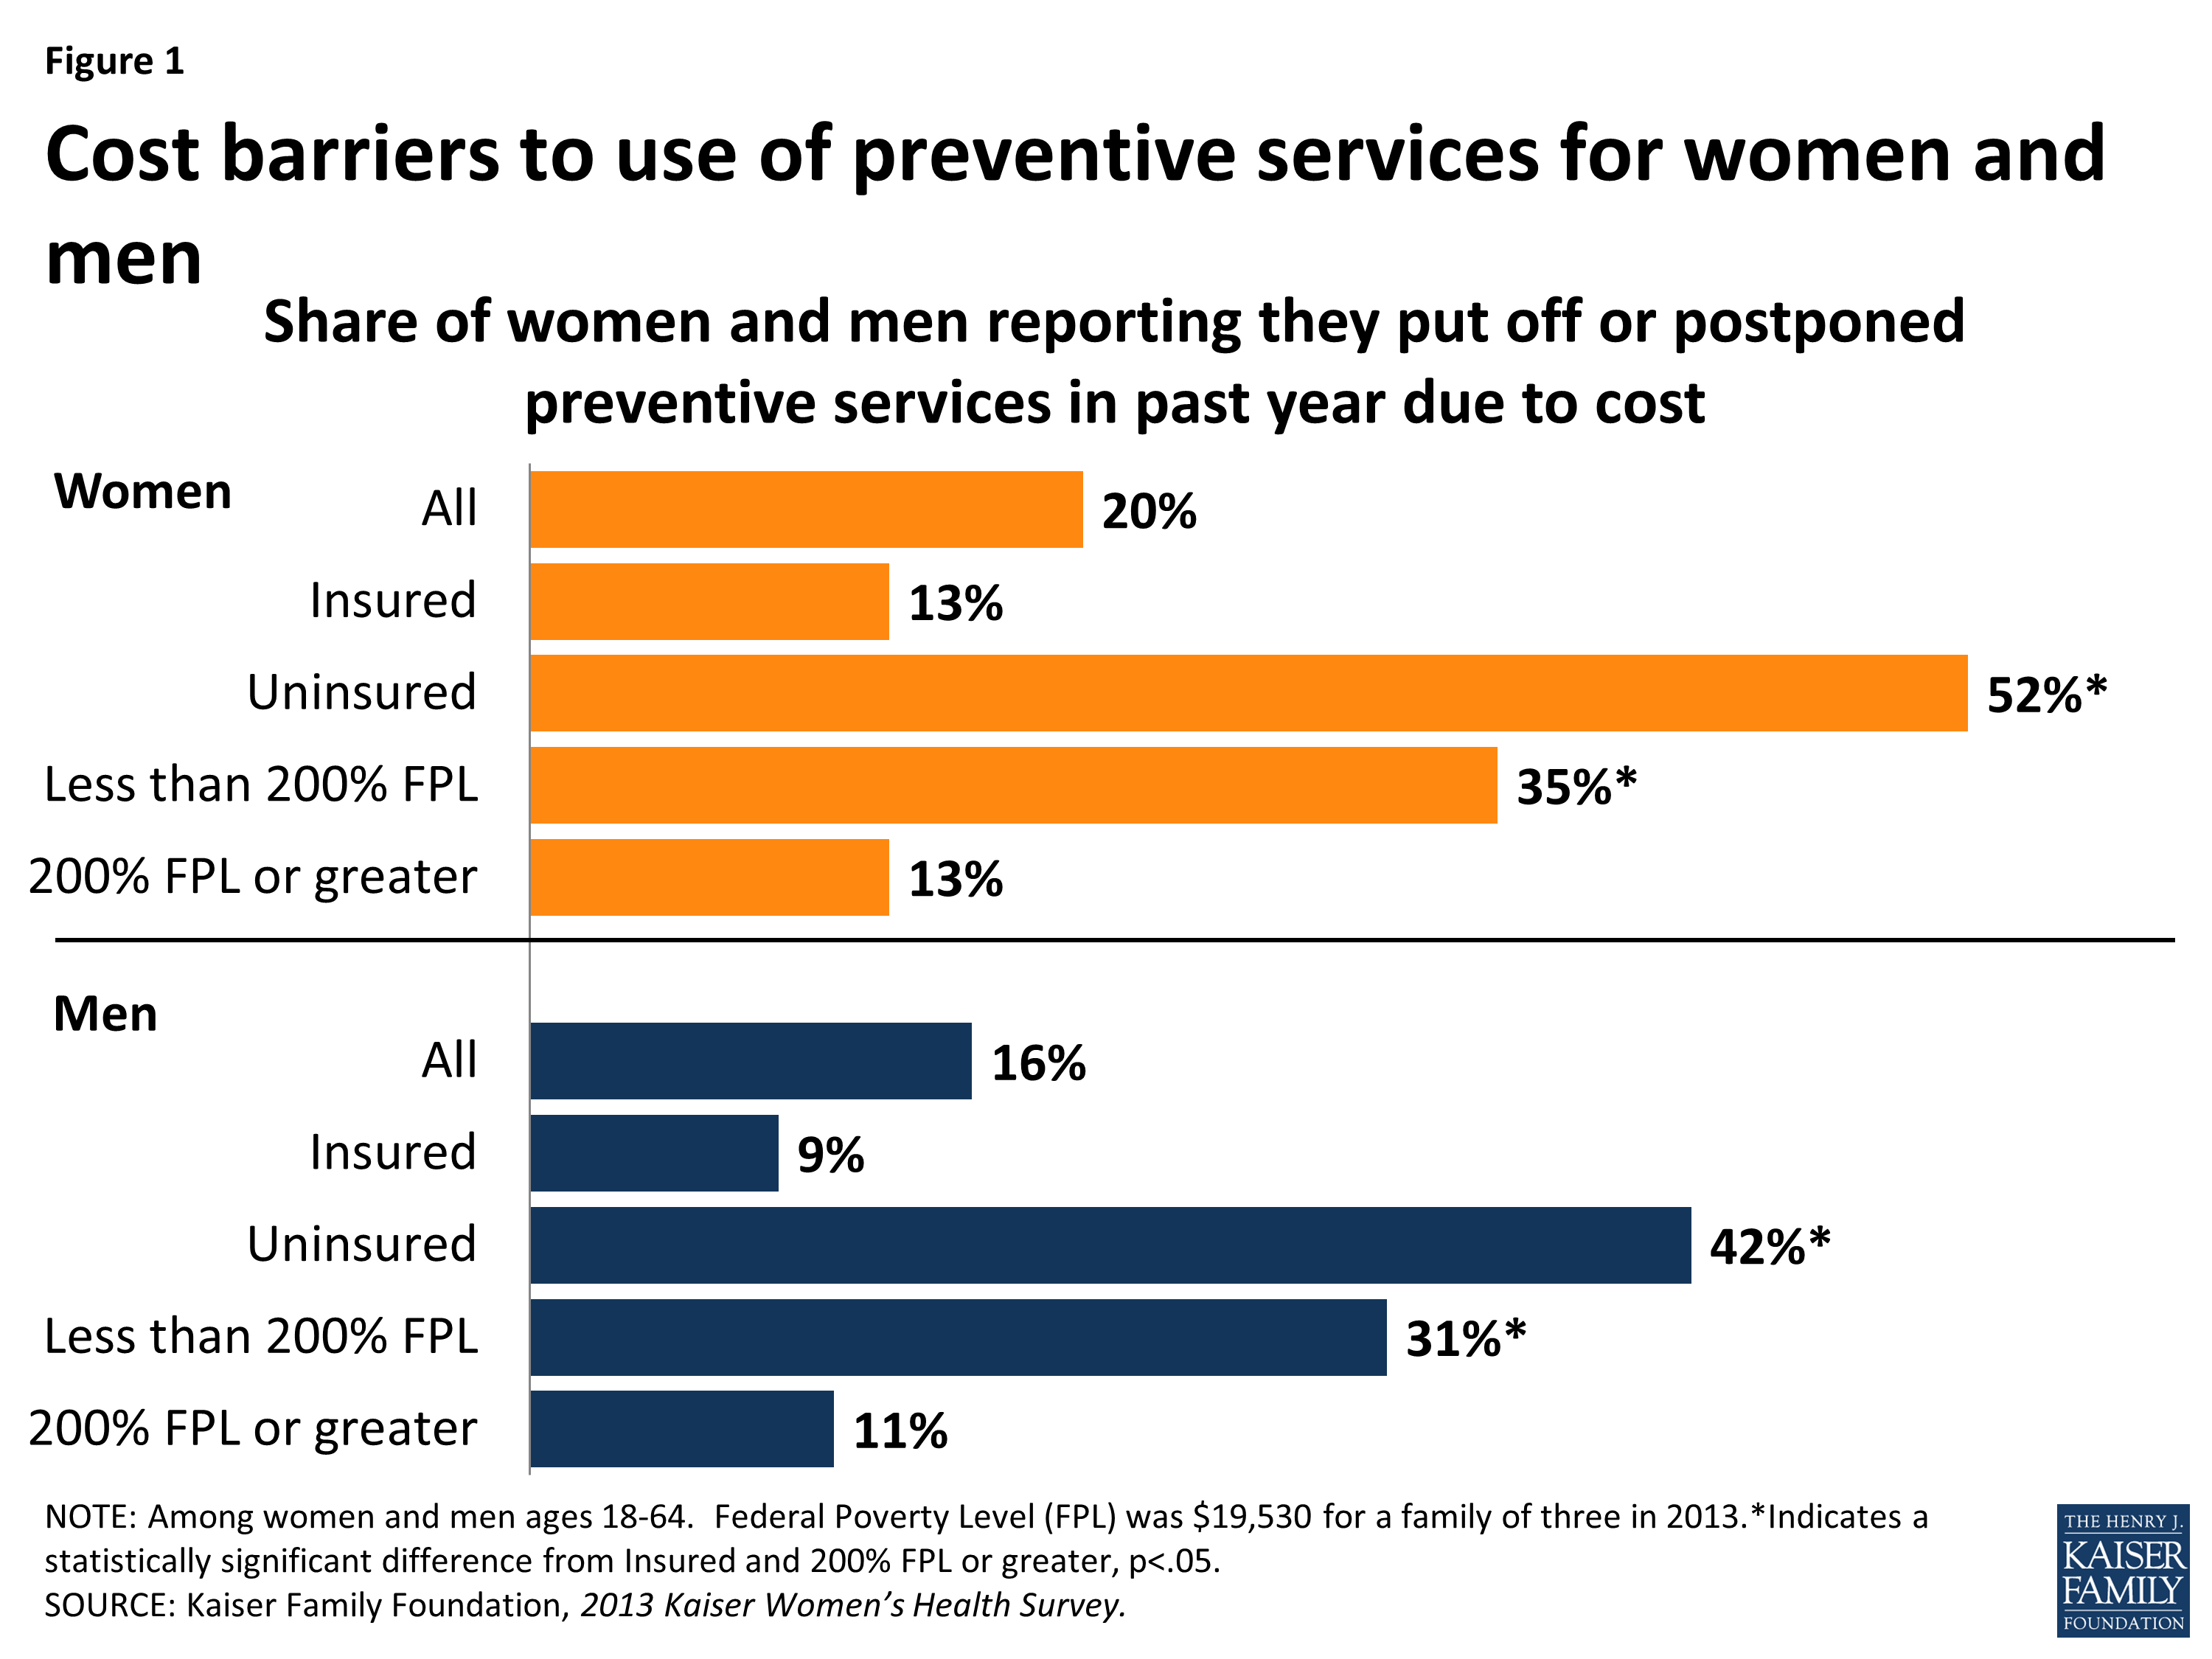 Preventive Services Covered By Private Health Plans Under The